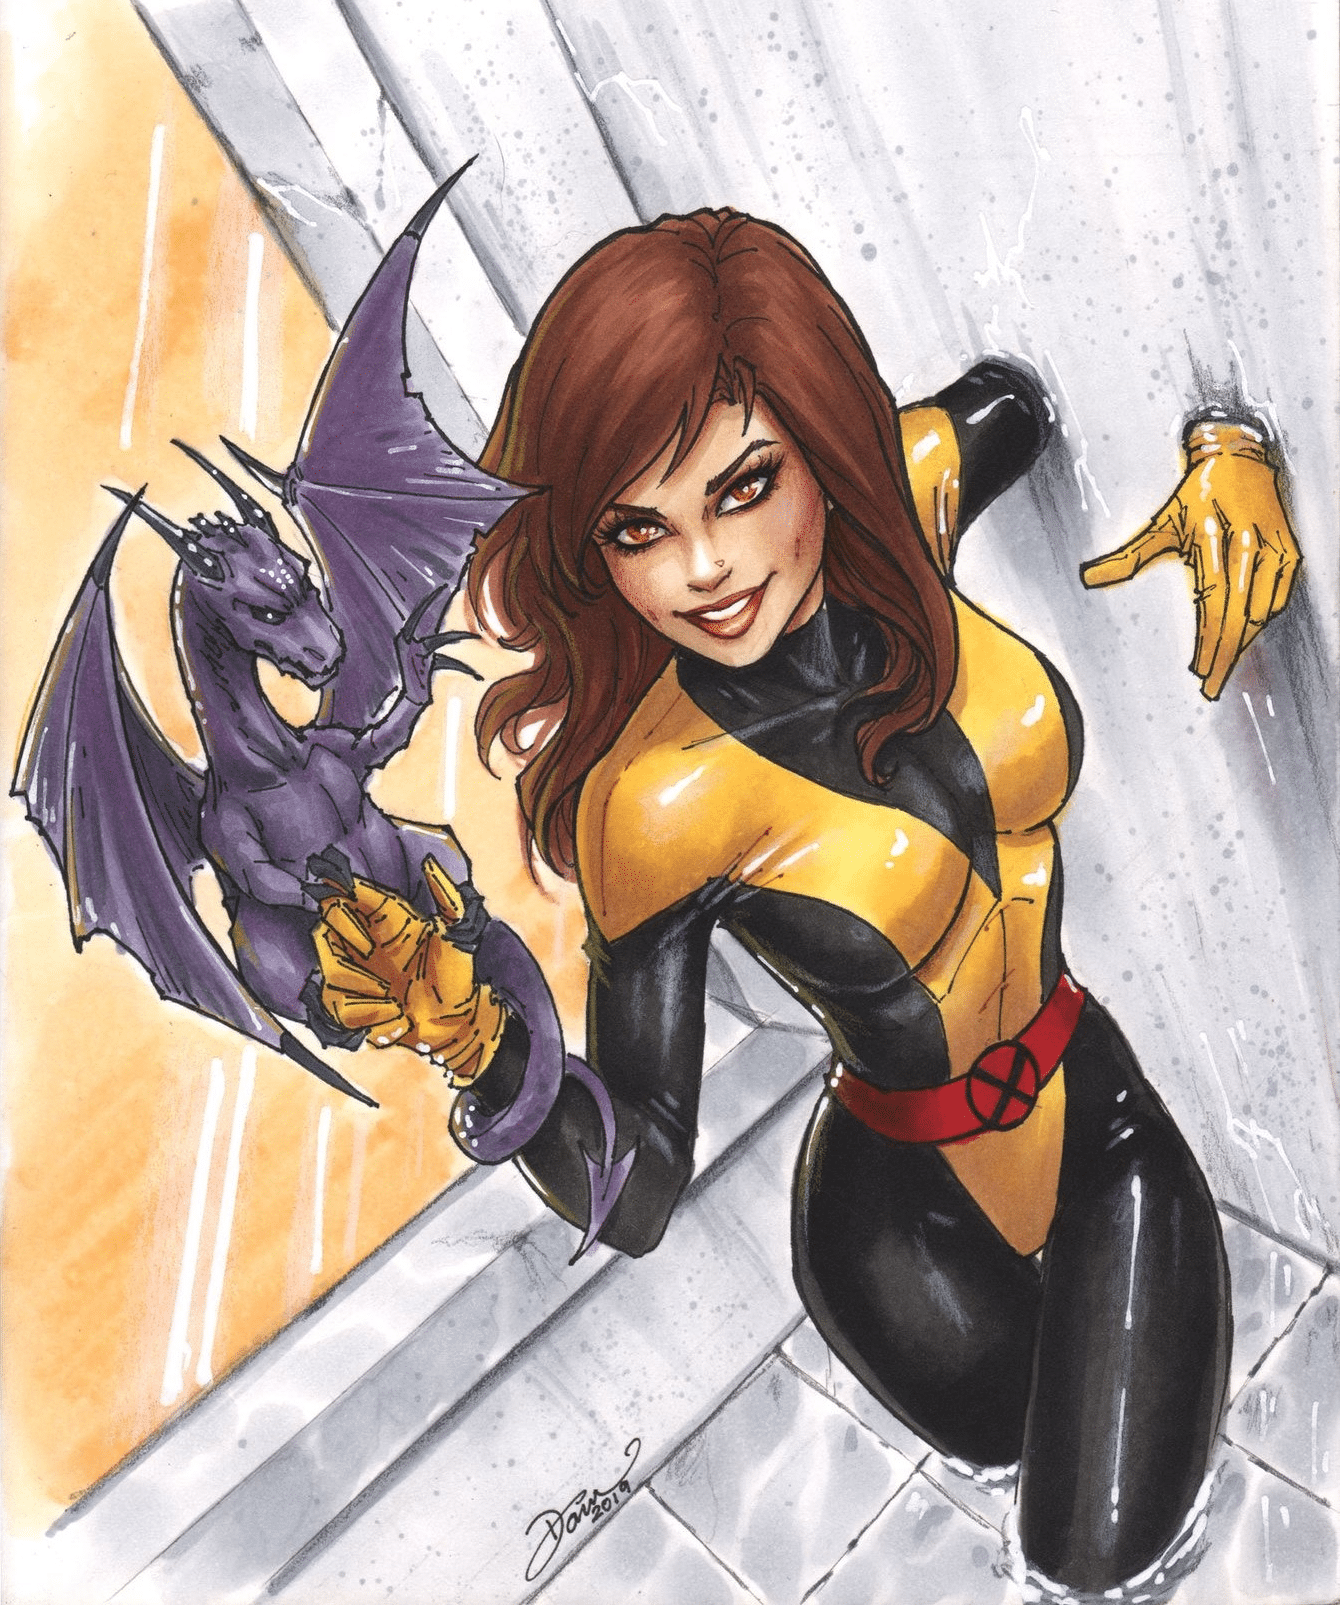 51 Hot Pictures Of Kitty Pryde That Will Make Your Heart Pound For Her 27